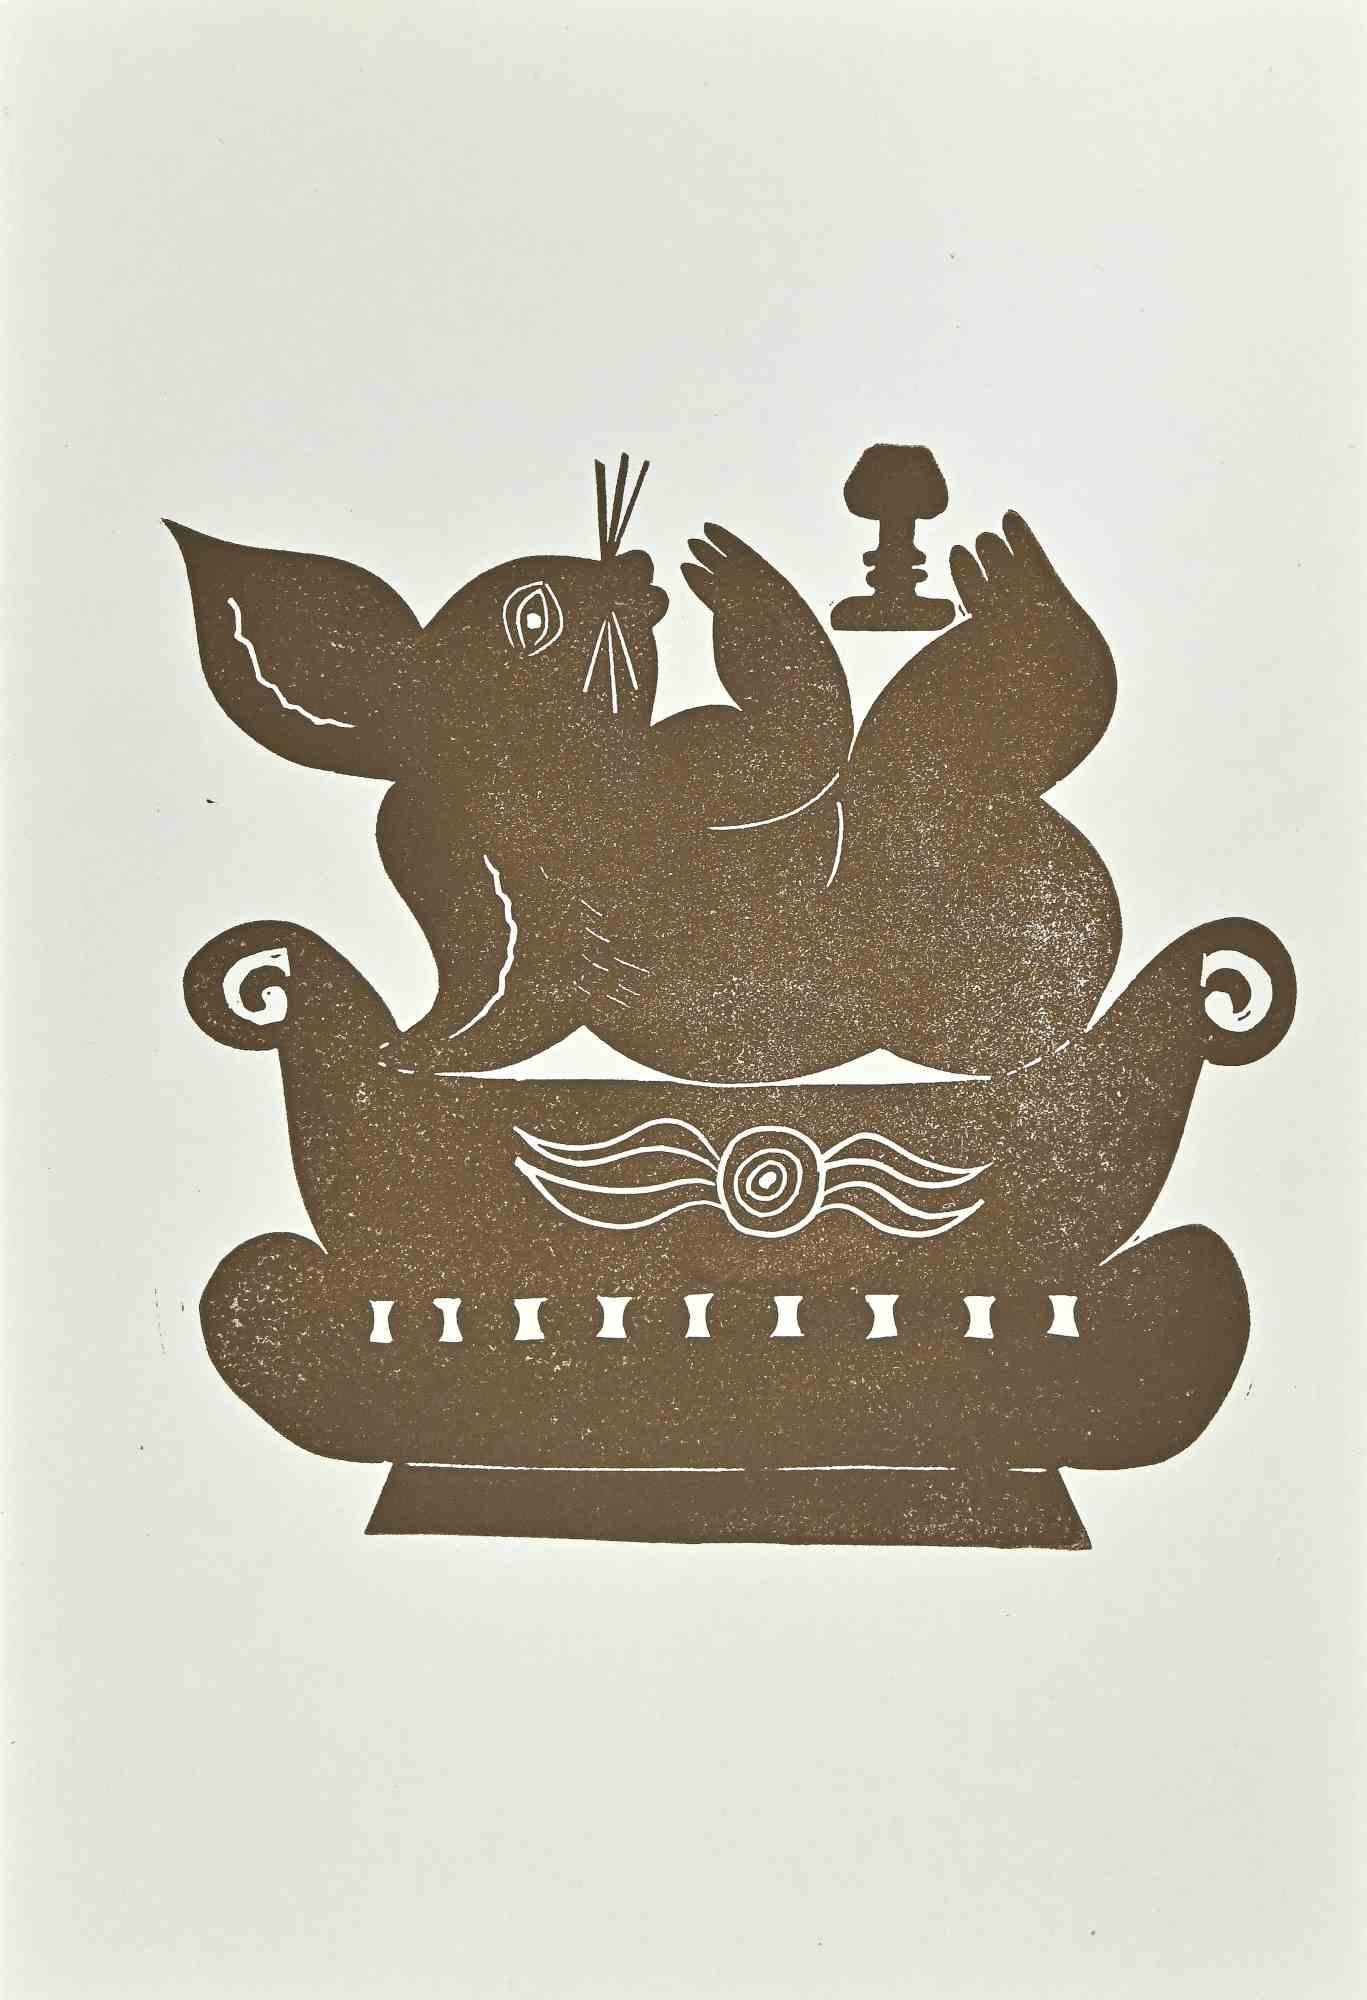 Jean Lurcat Figurative Print - The Rabbit in Vase - Lithograph By Jean Lurçat - Mid-20th Century